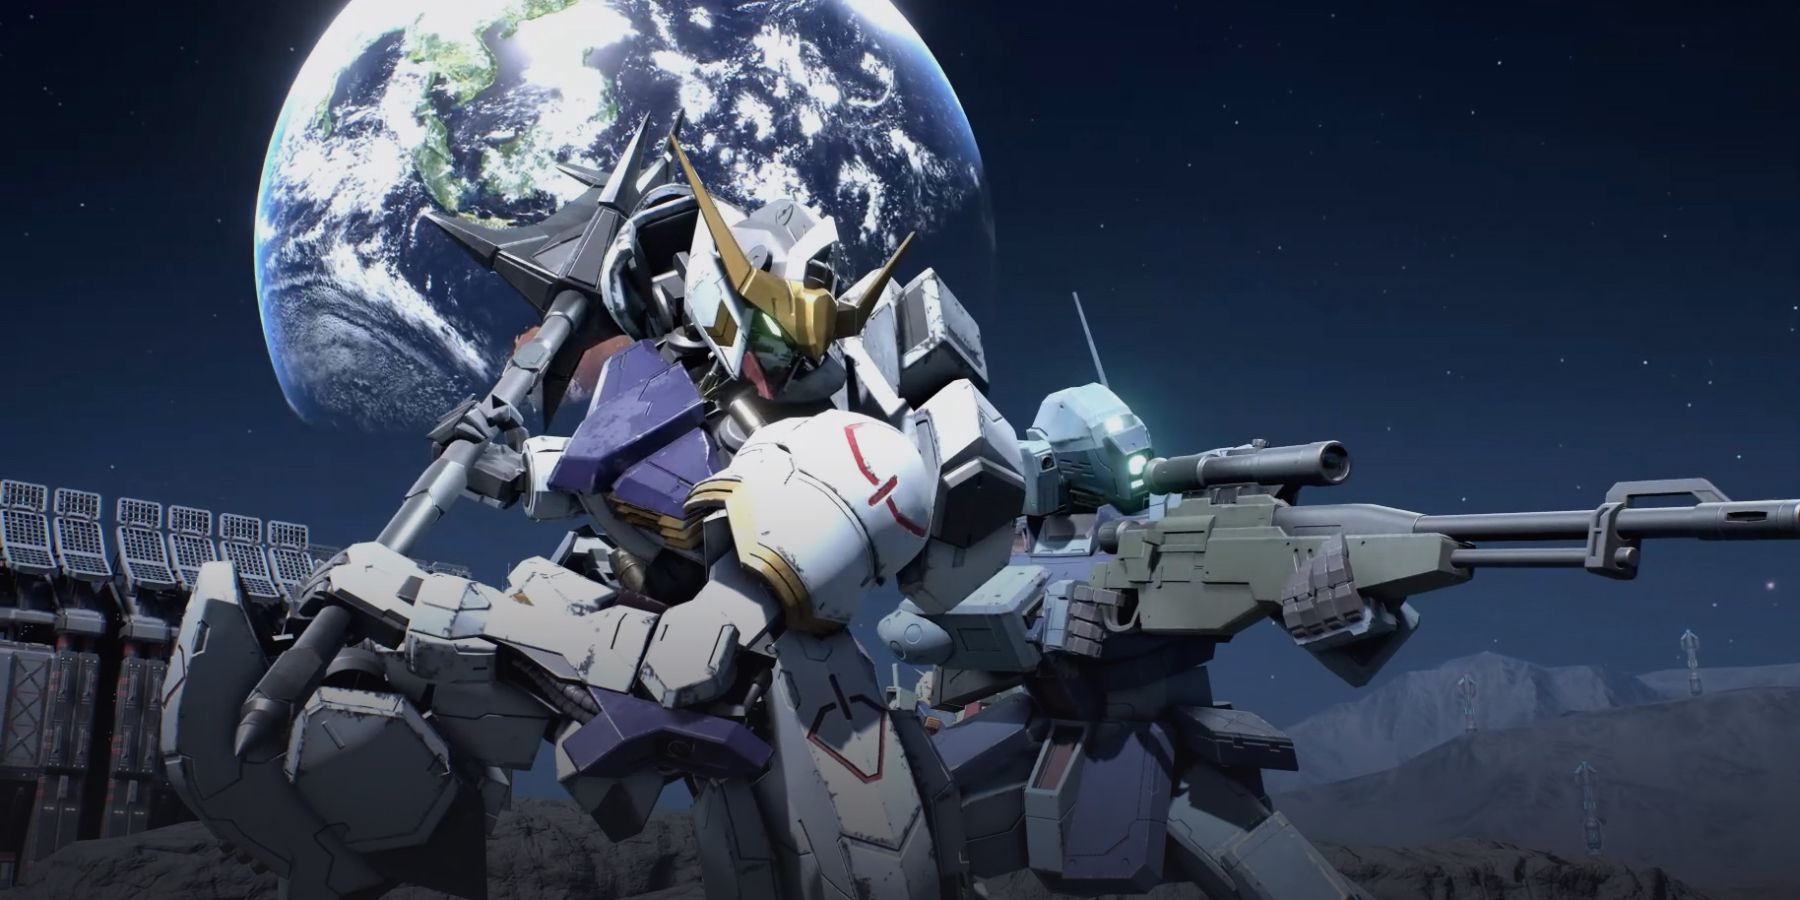 Gundam Evolution's Barbatos fills an annoyingly niche role in the game just like TF2's Spy.